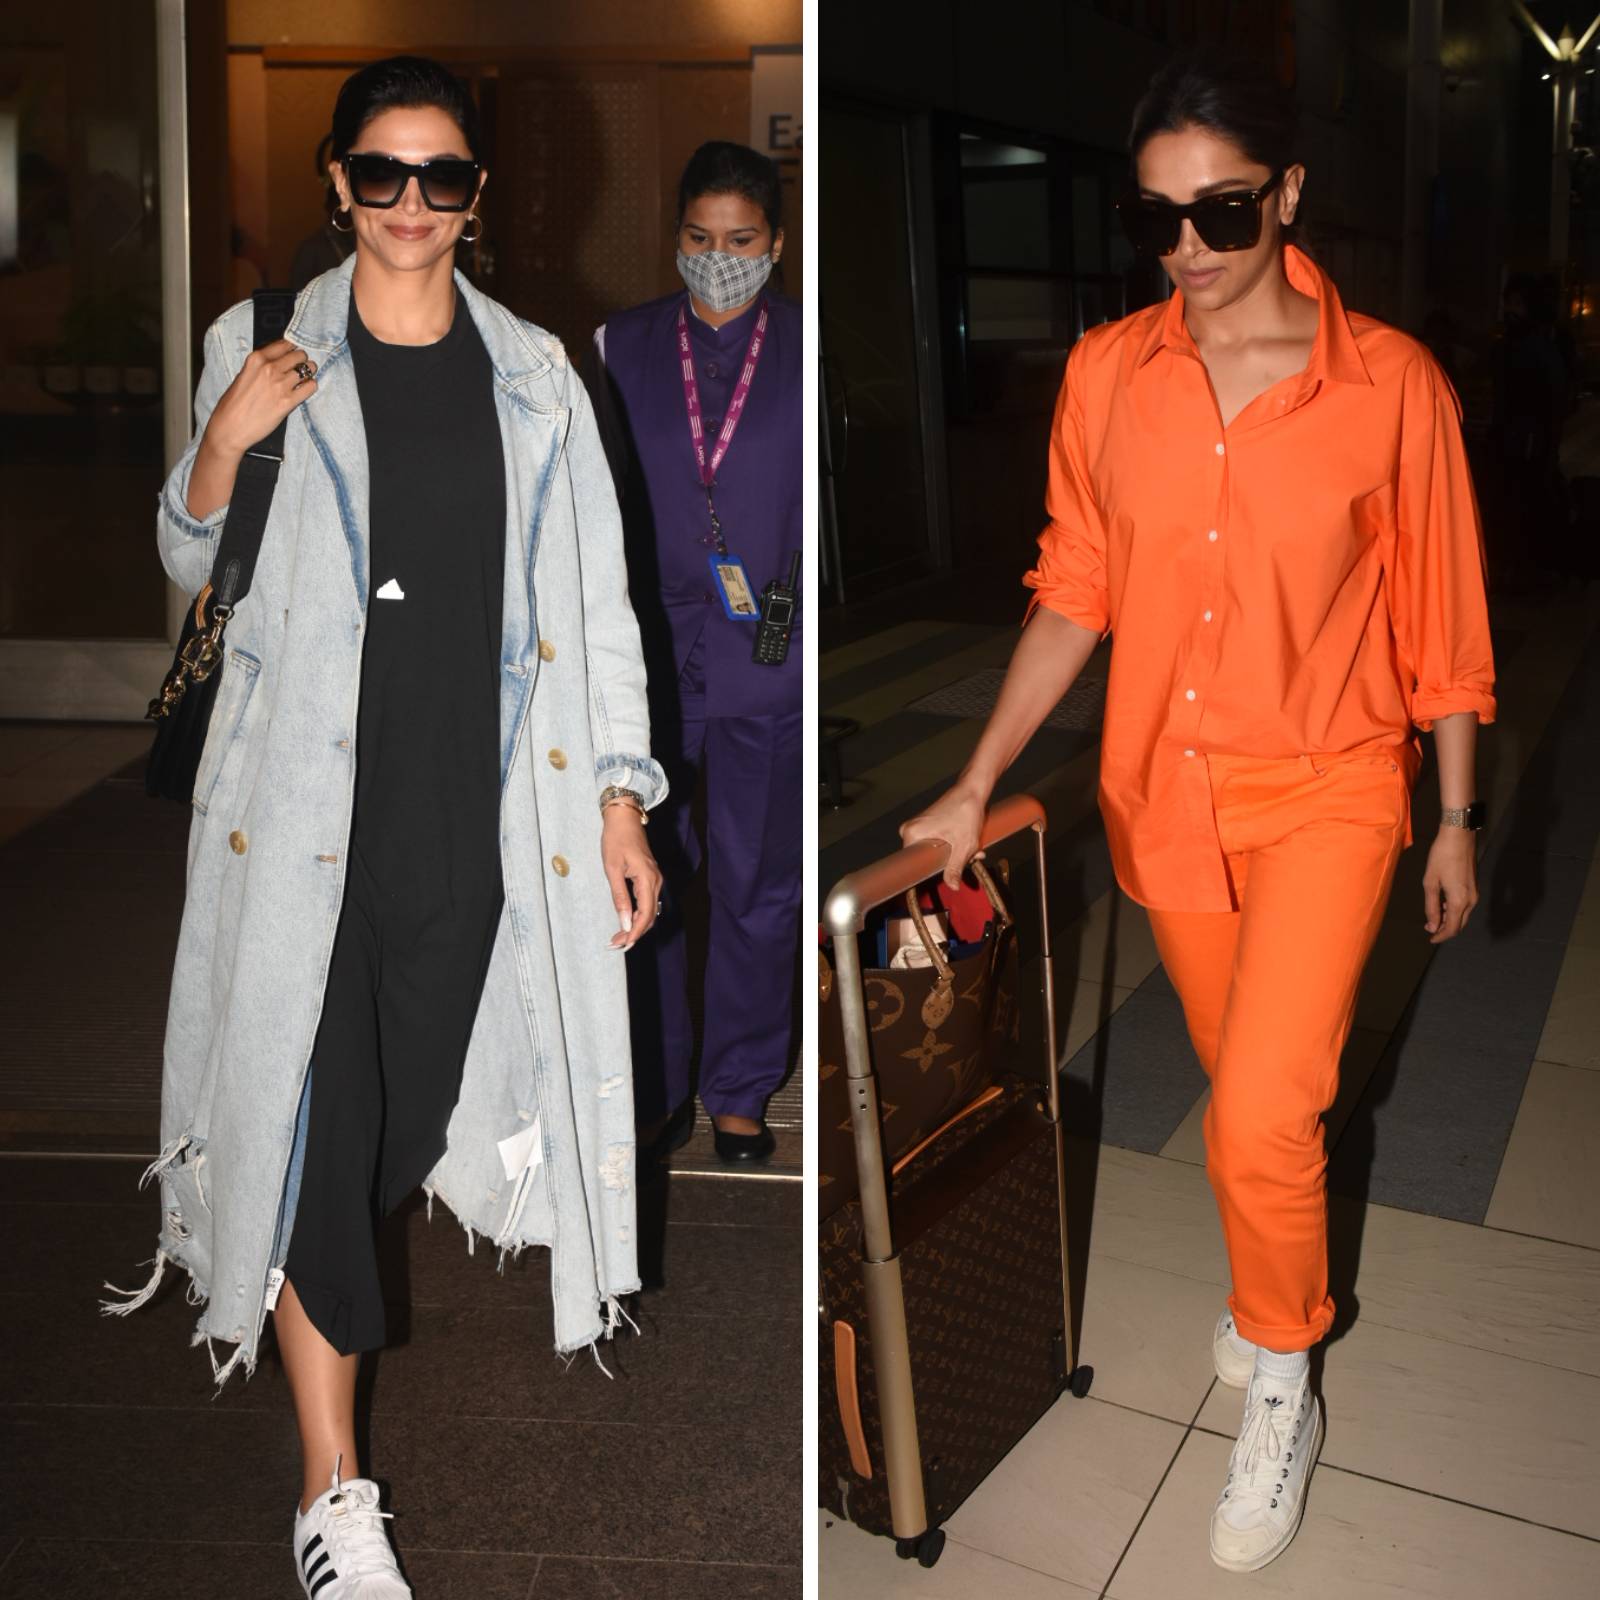 IN PICS: Deepika Padukone oozes oomph as she arrives wearing an oversized  camo jacket at the airport